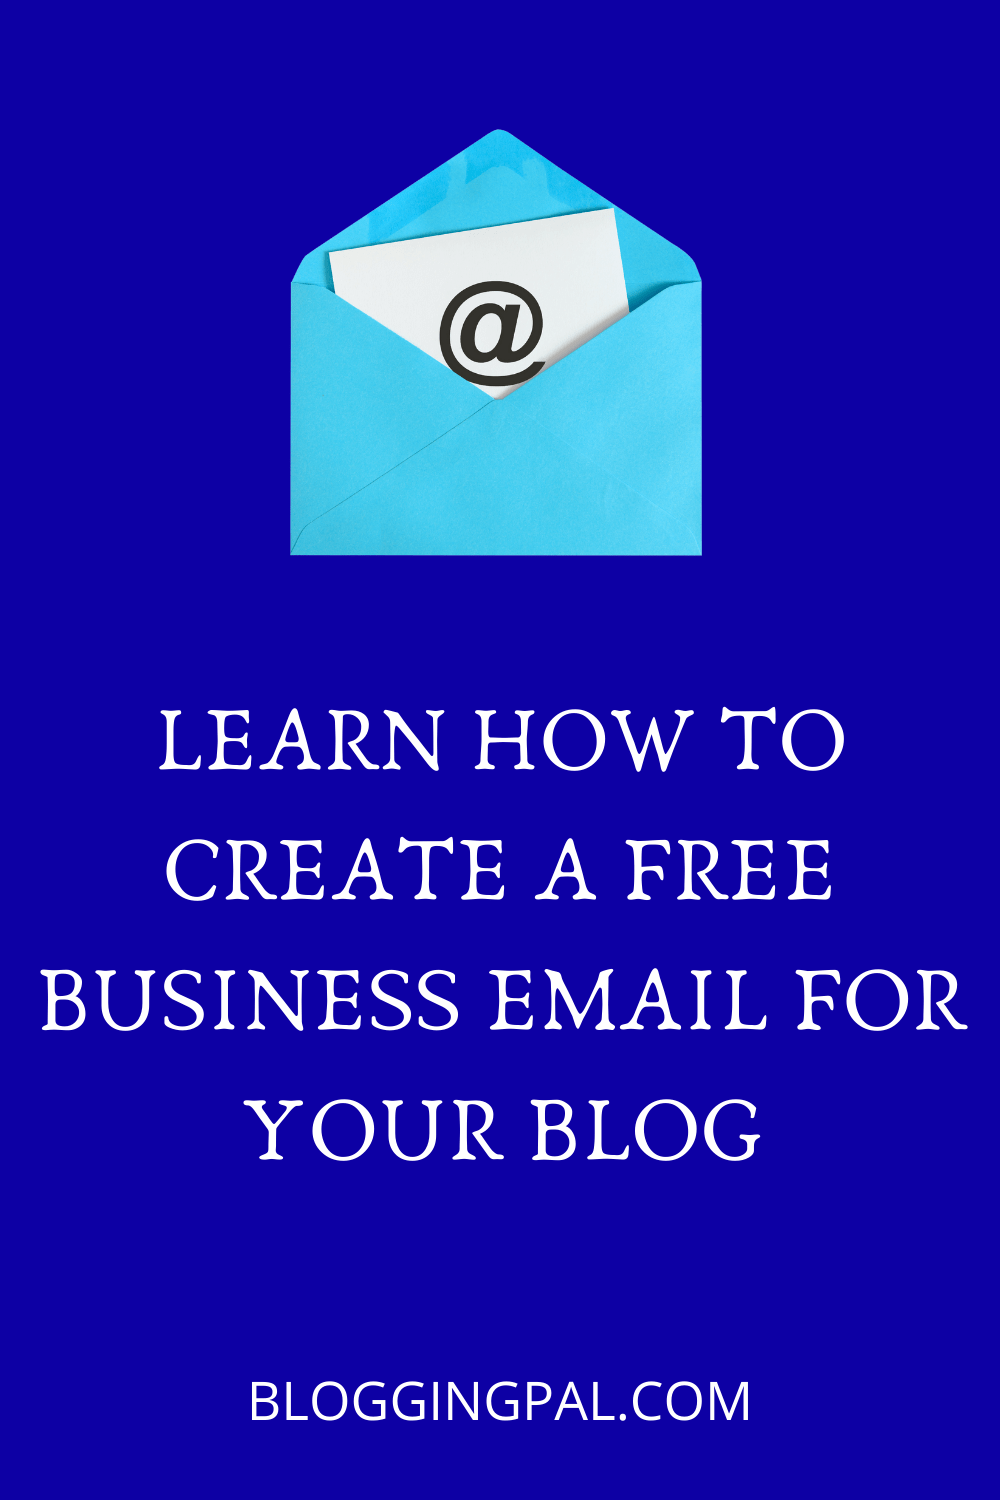 How To Create a FREE Business Email